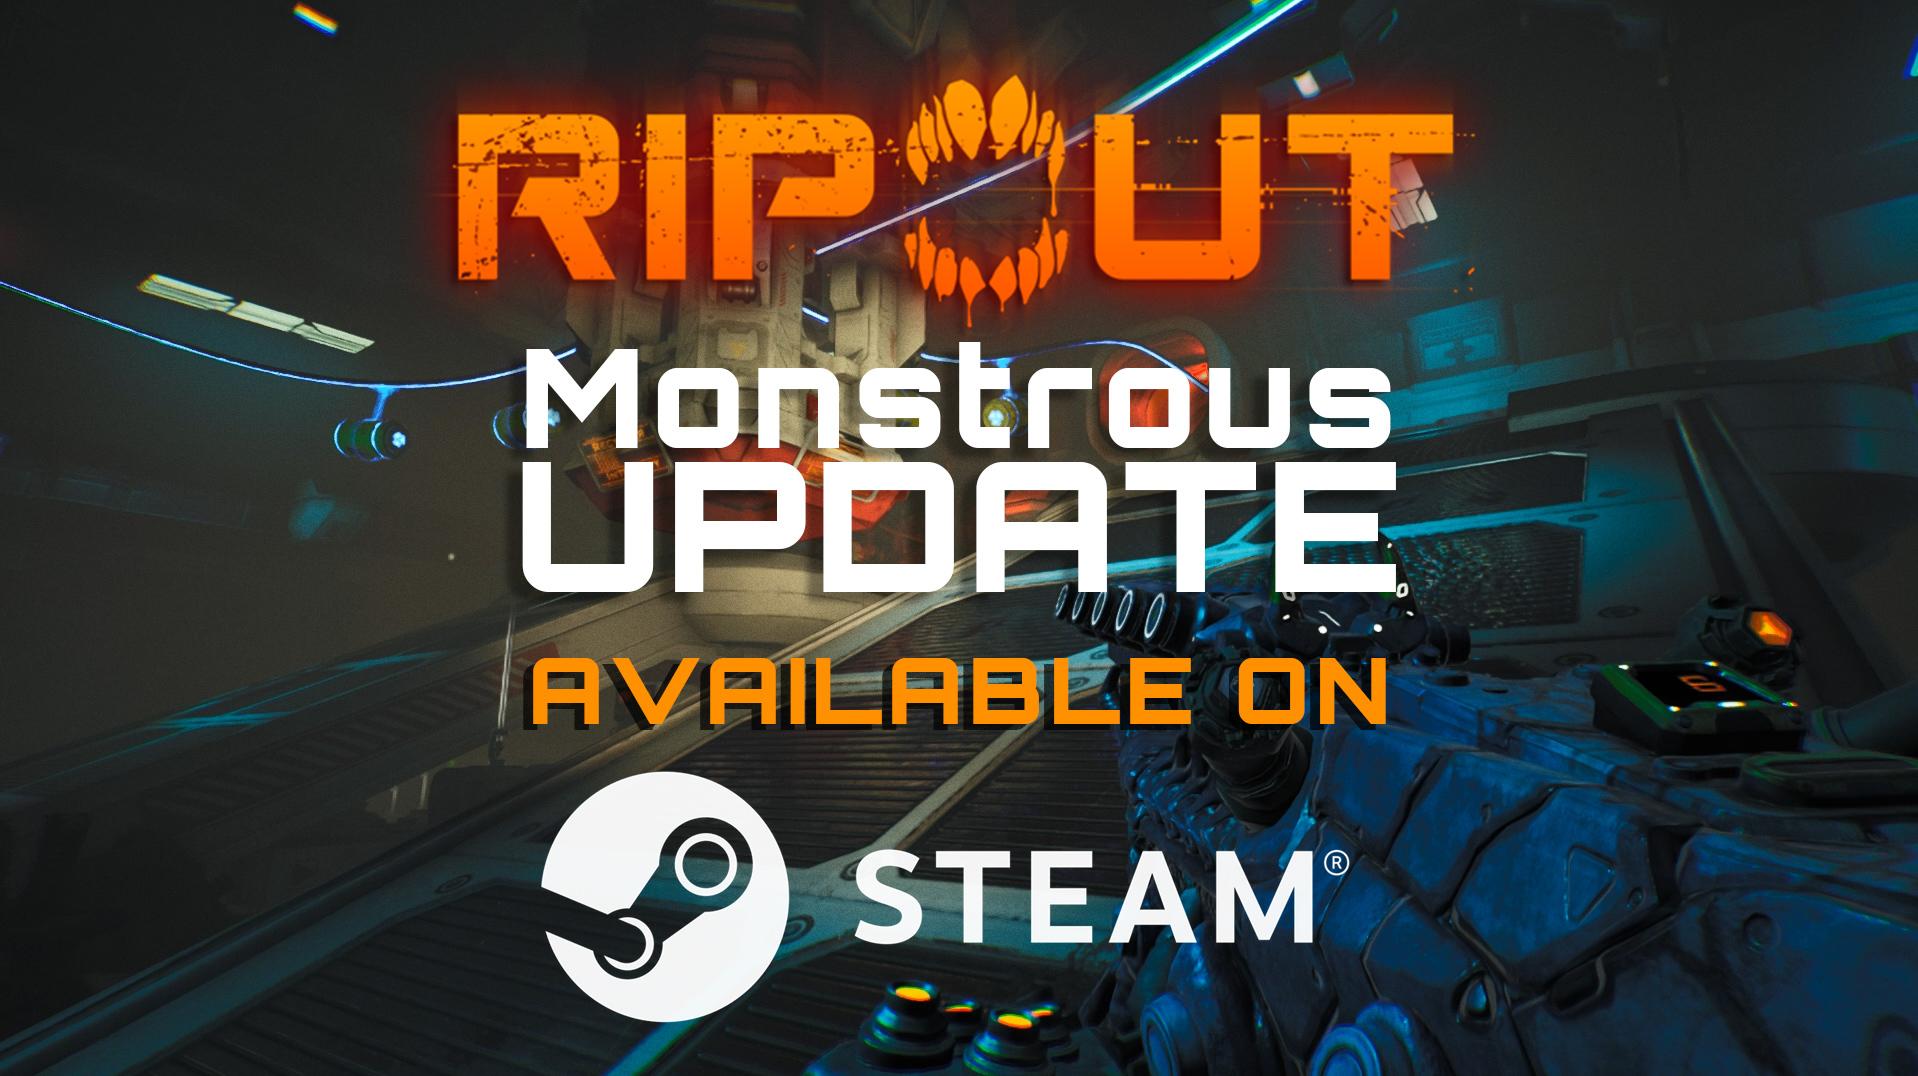 Ripout’s New Monstrous Update Available on Steam